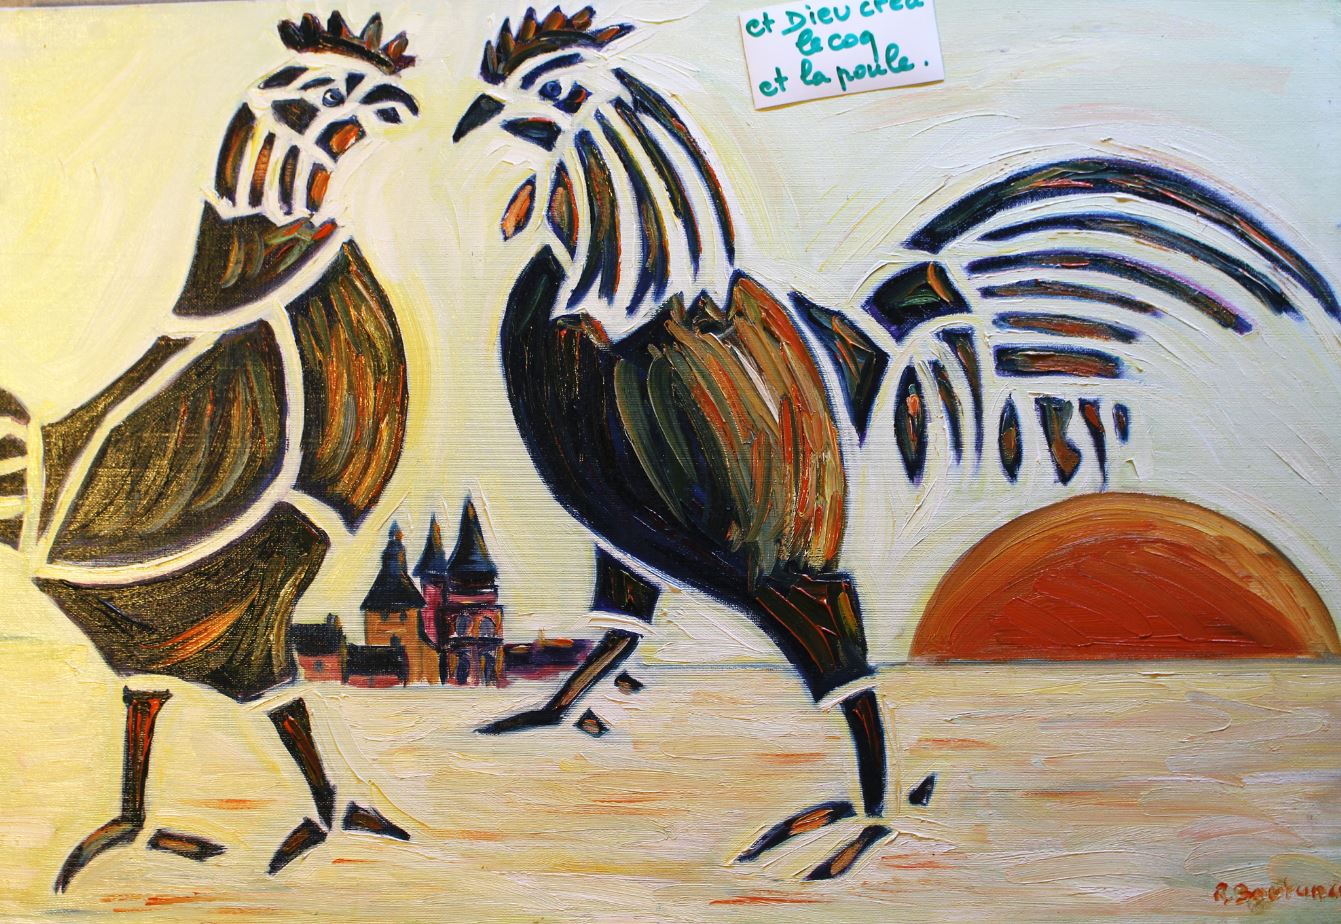 Artwork for sale René Boutang Collonges la rouge And God created the sky, the rooster, Collonges...  